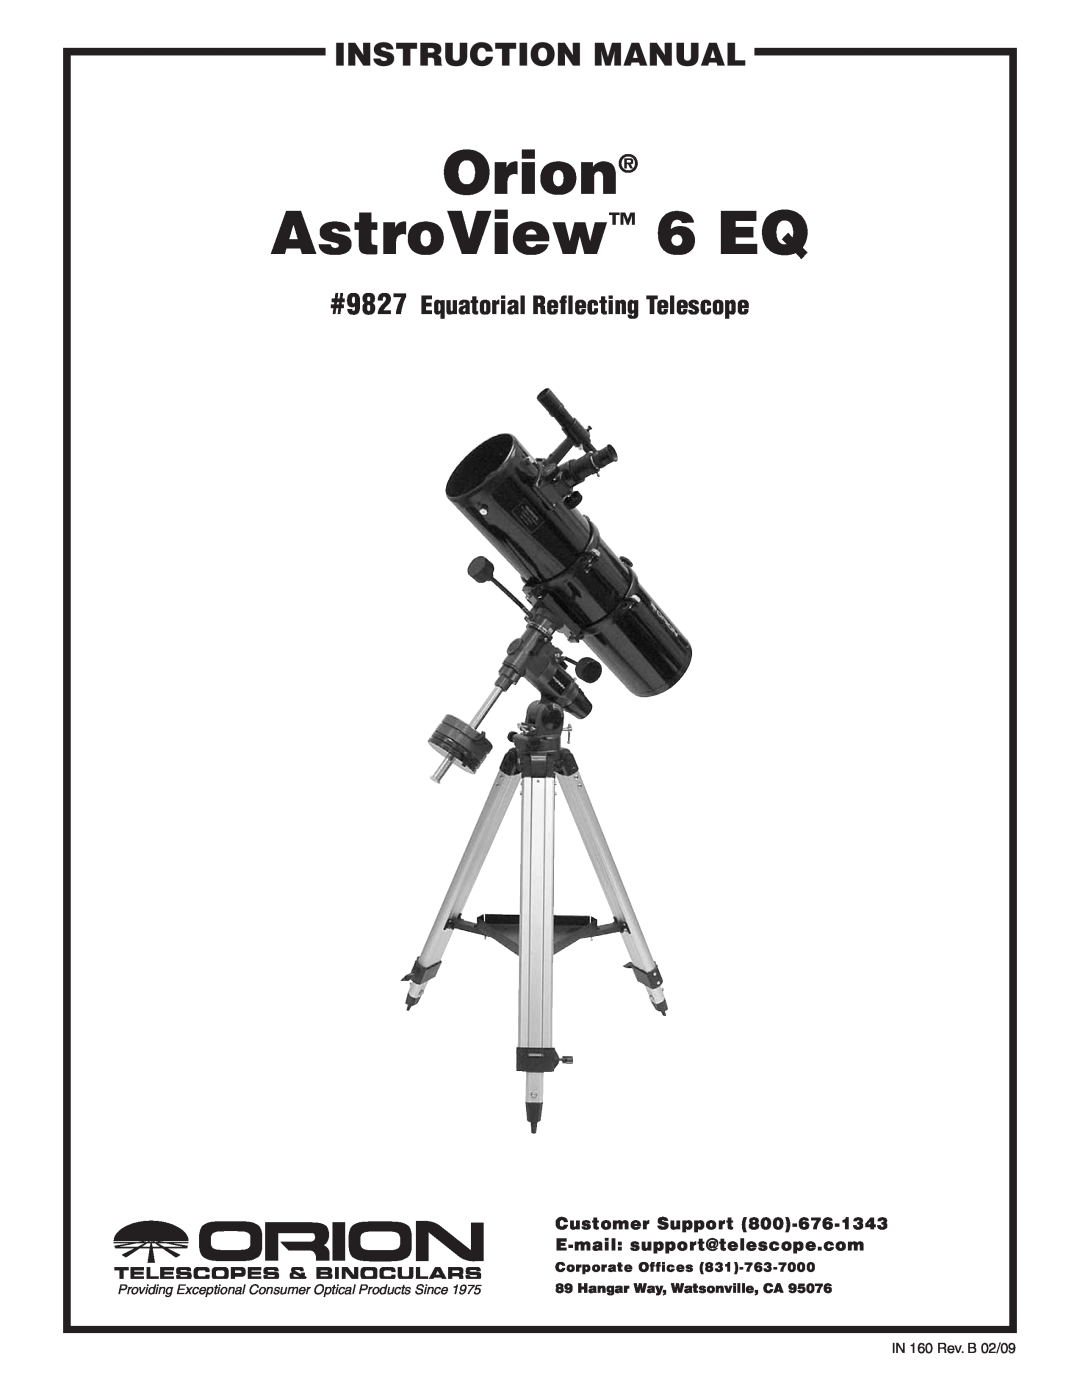 Orion instruction manual #9827 Equatorial Reflecting Telescope, Customer Support 800‑676-1343, Orion AstroView 6 EQ 